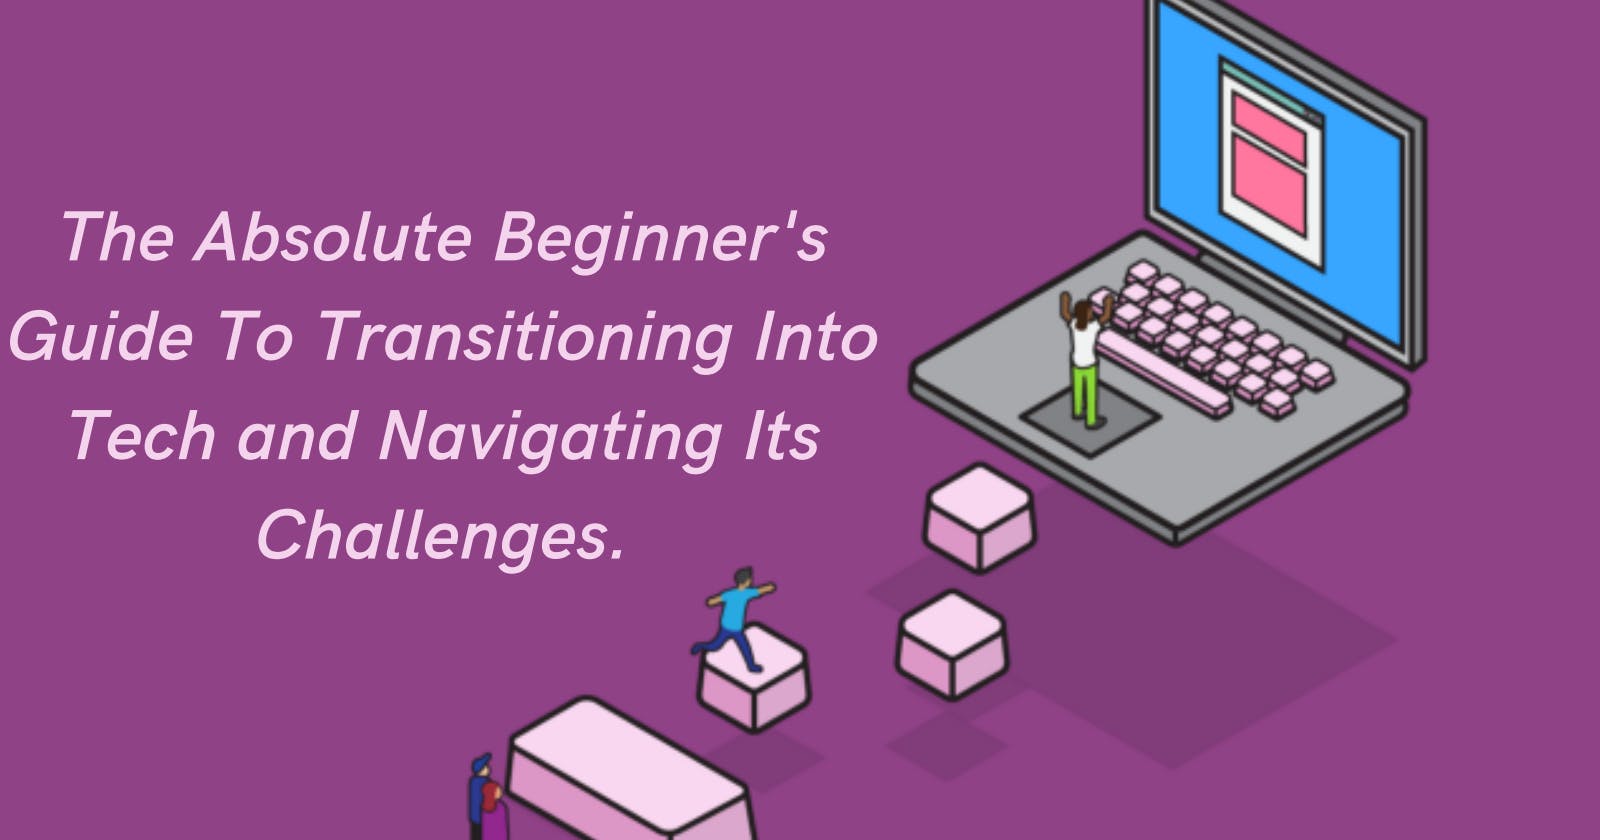 The Absolute Beginner's Guide To Transitioning Into Tech and Navigating Its Challenges.